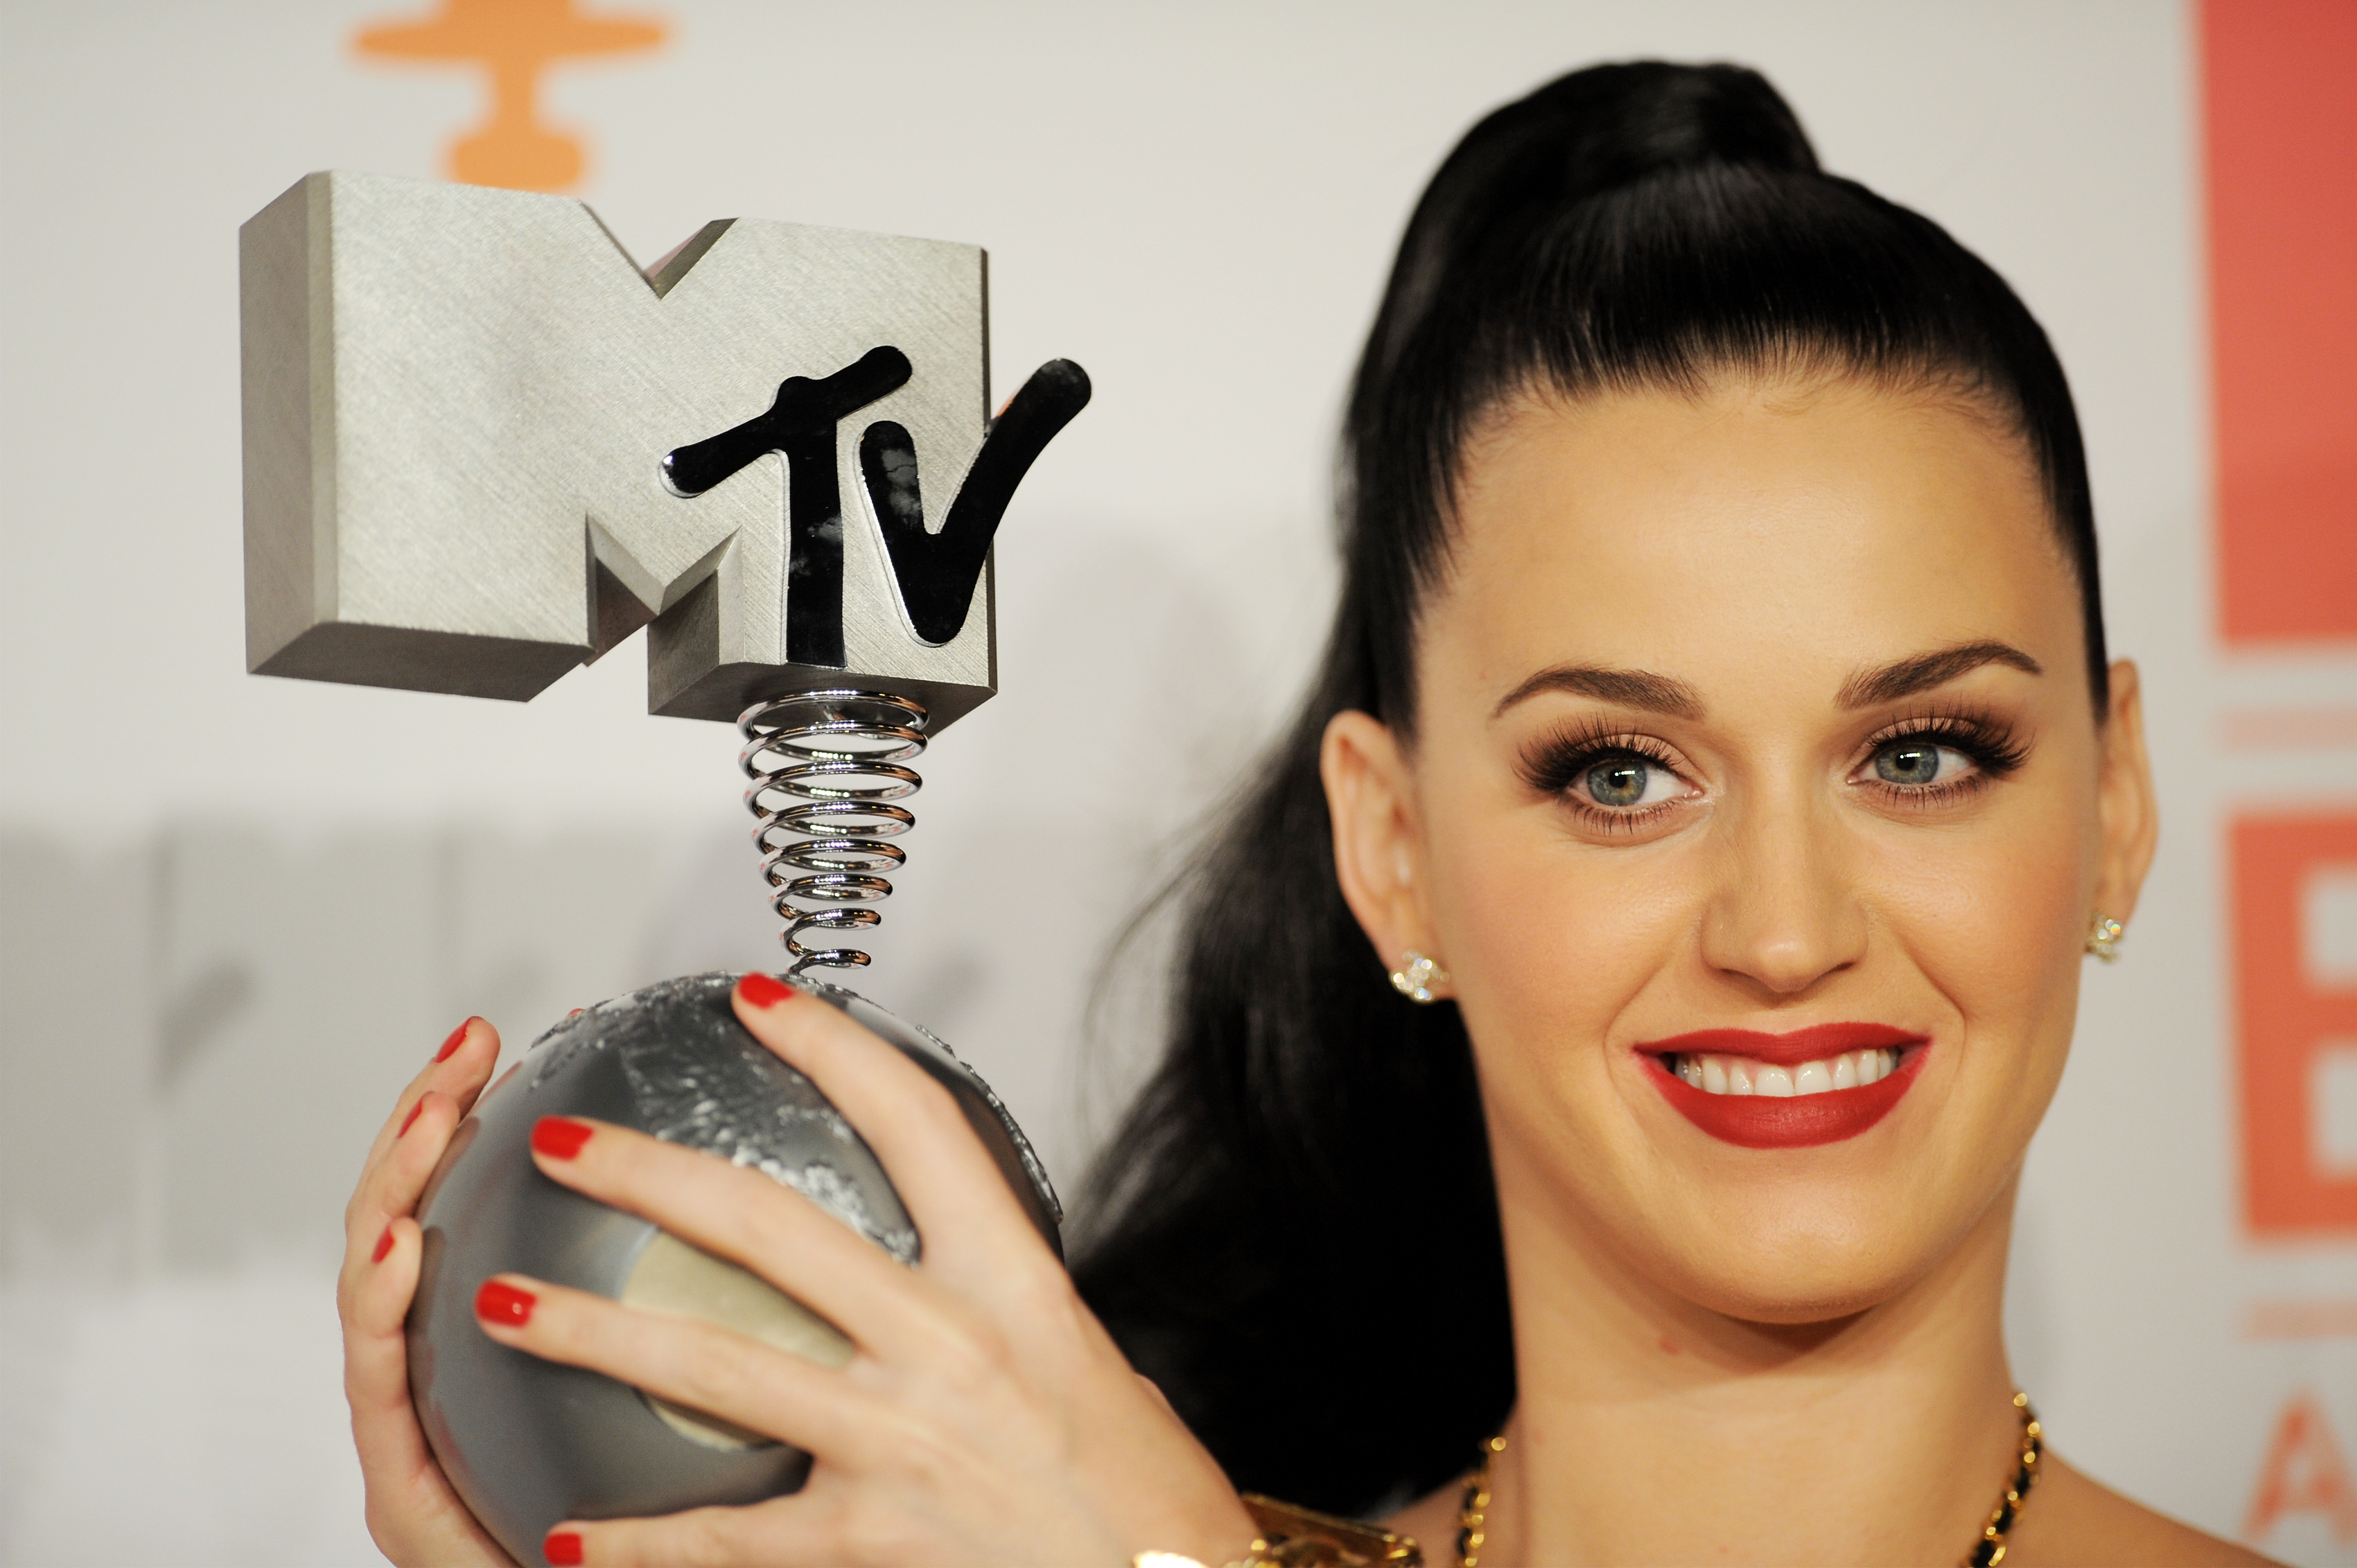 AMSTERDAM, NETHERLANDS - NOVEMBER 10: Katy Perry poses with the Best Female award in the photo room during the MTV EMA's 2013 at the Ziggo Dome on November 10, 2013 in Amsterdam, Netherlands. (Photo by Stuart C. Wilson/Getty Images for MTV)